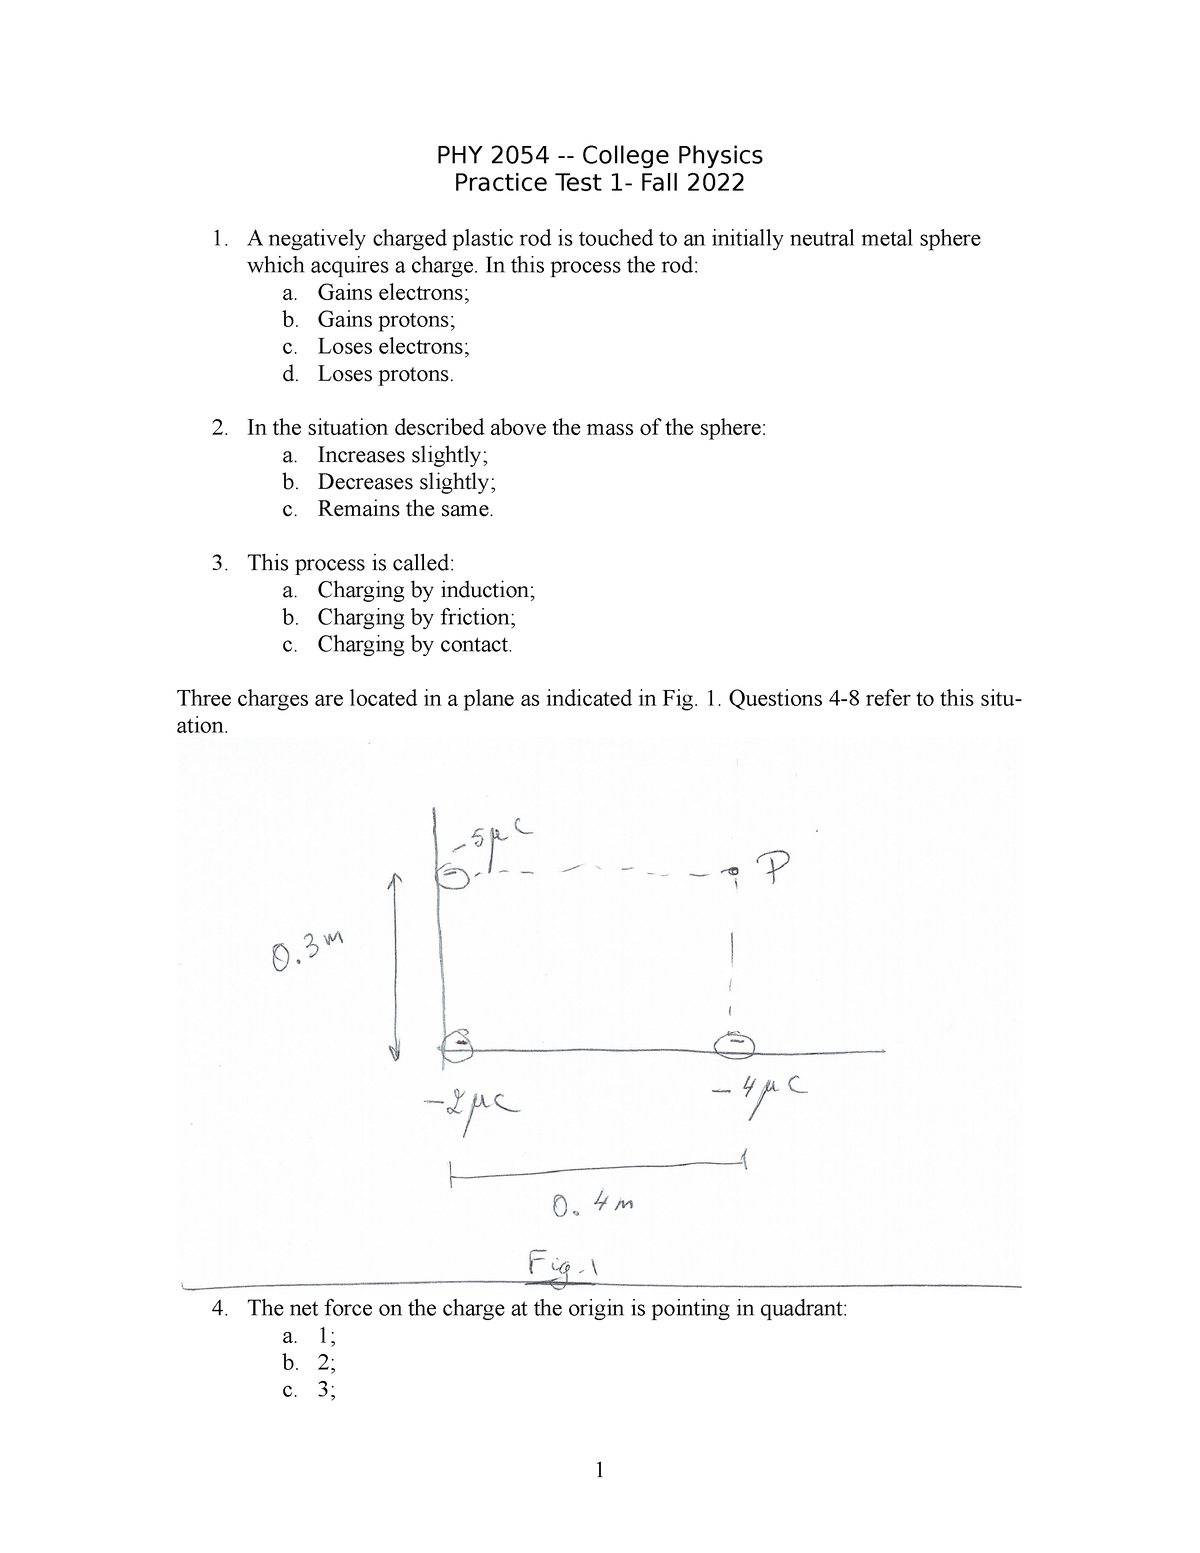 PracticeTest1F2022 PHY 2054 College Physics Practice Test 1 Fall